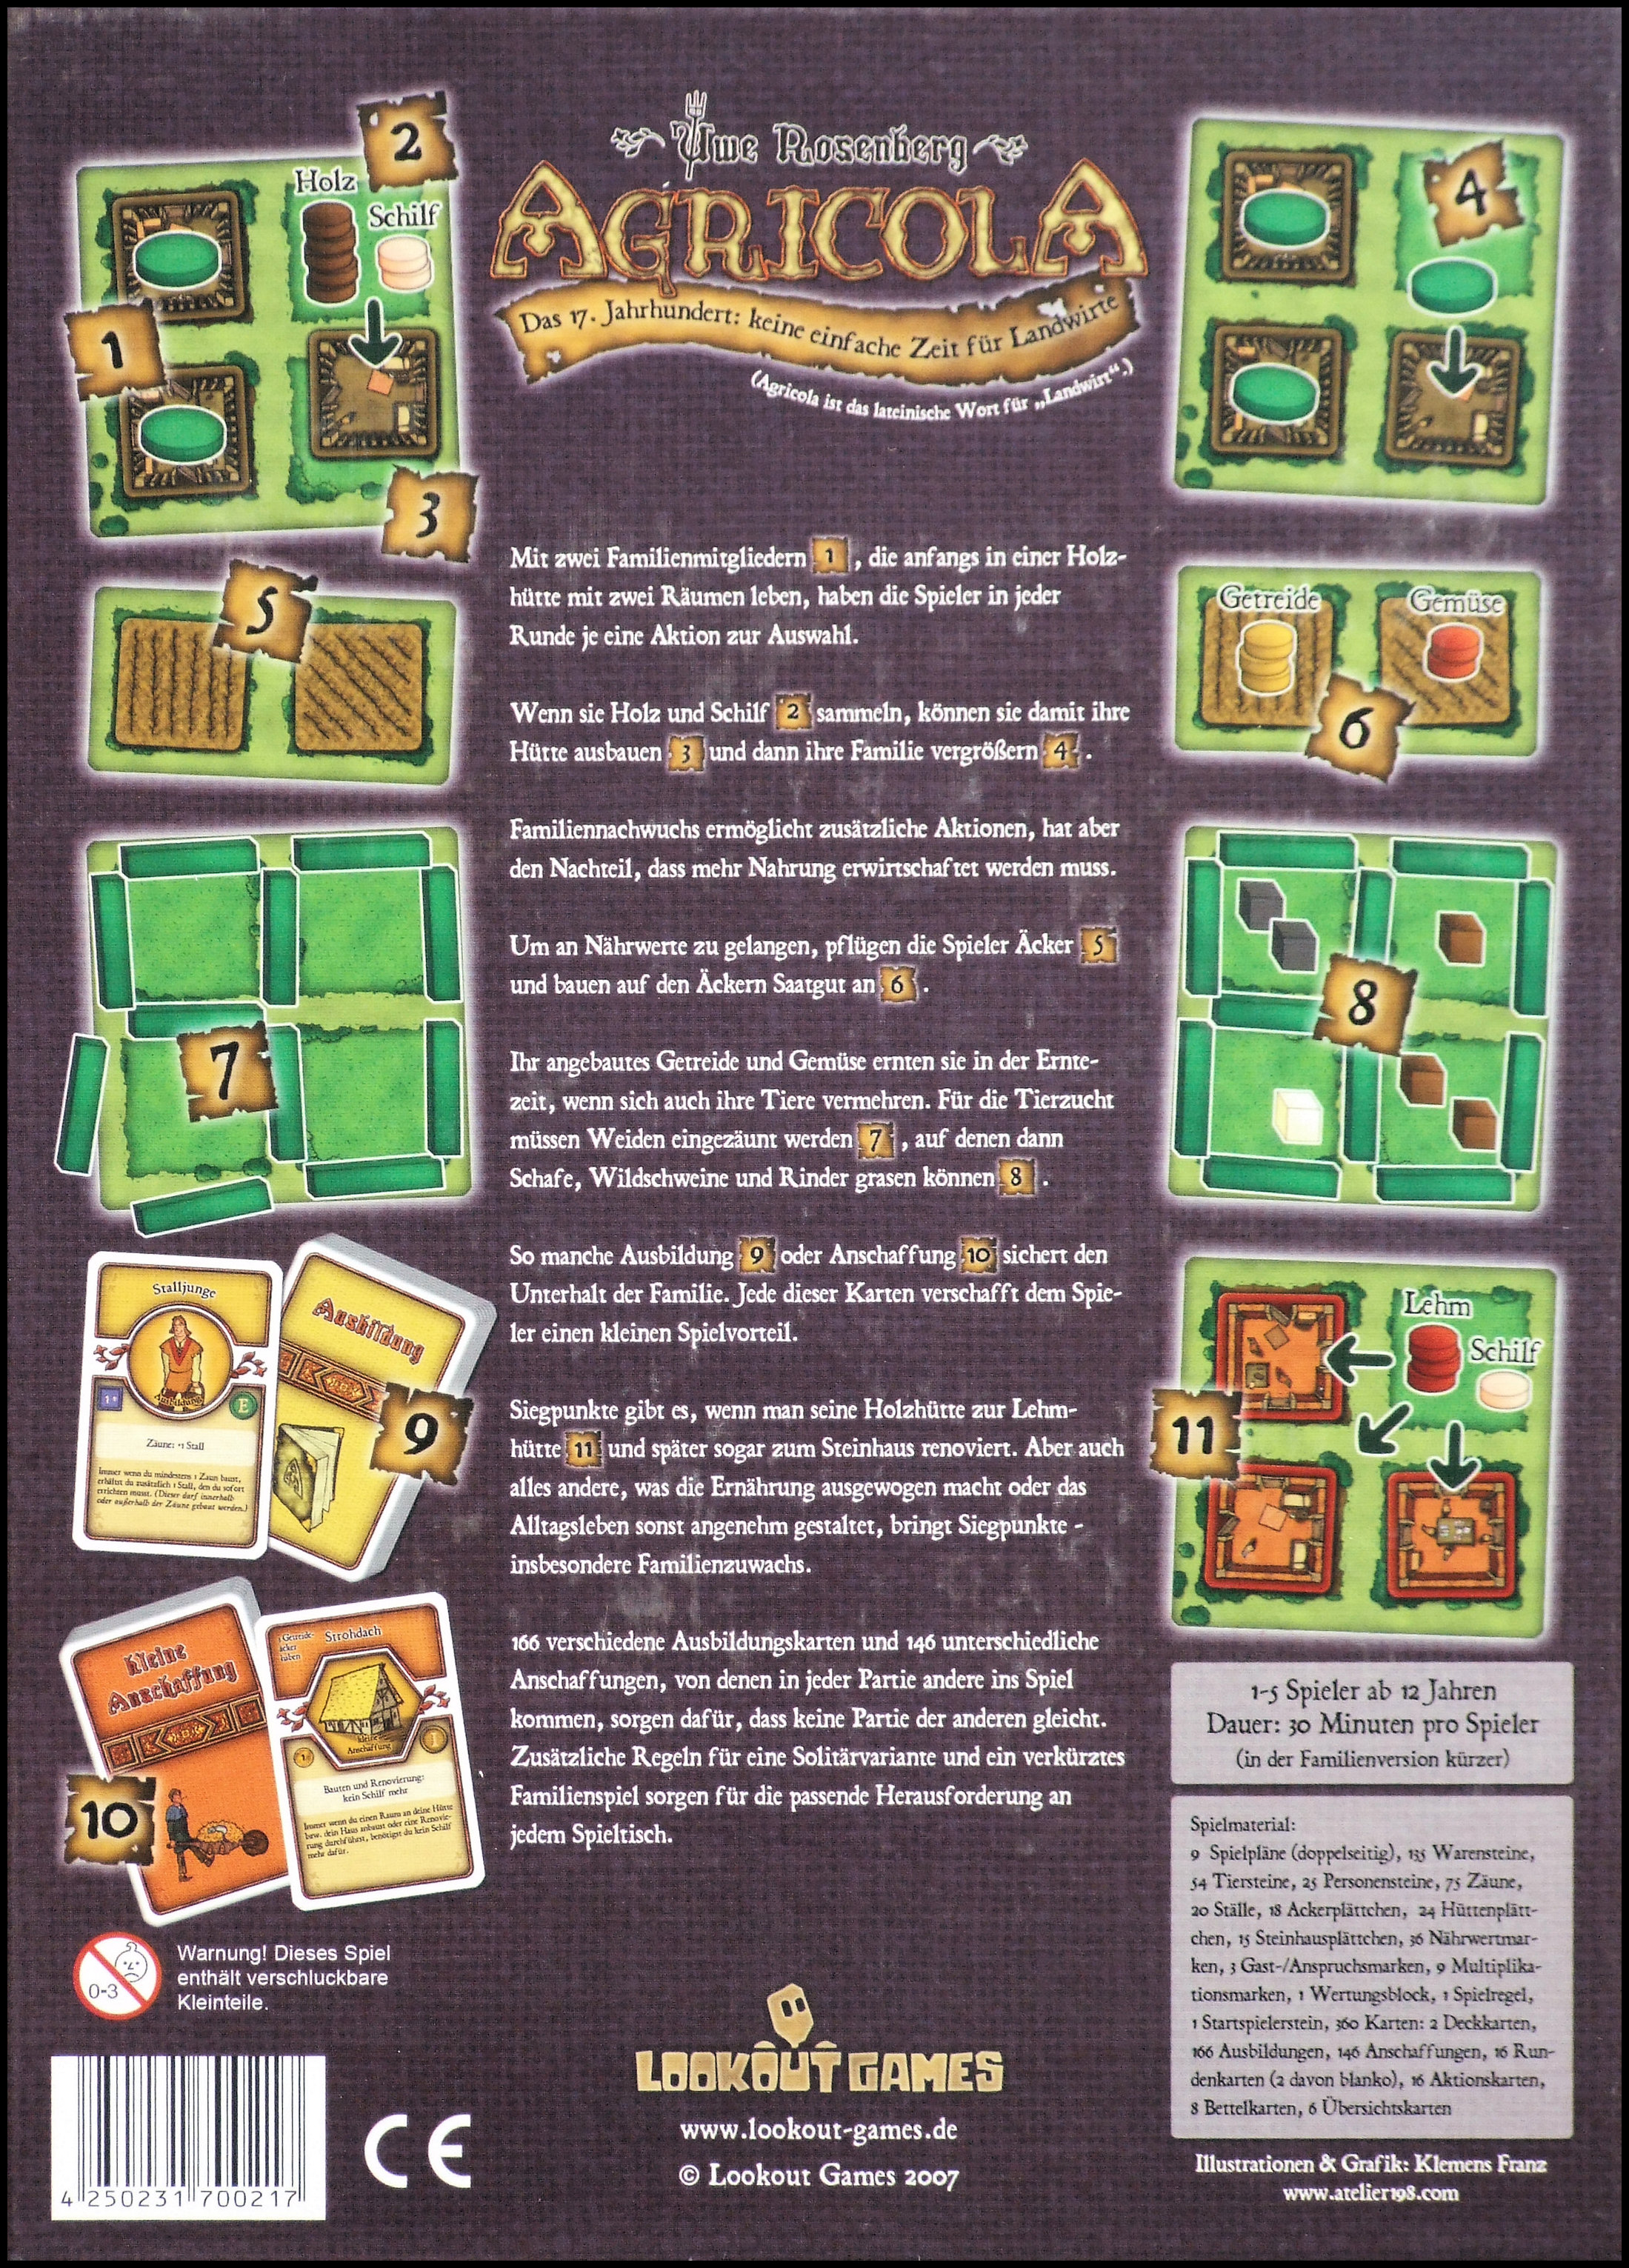 Agricola - Box Back (Lookout Games, German Edition)